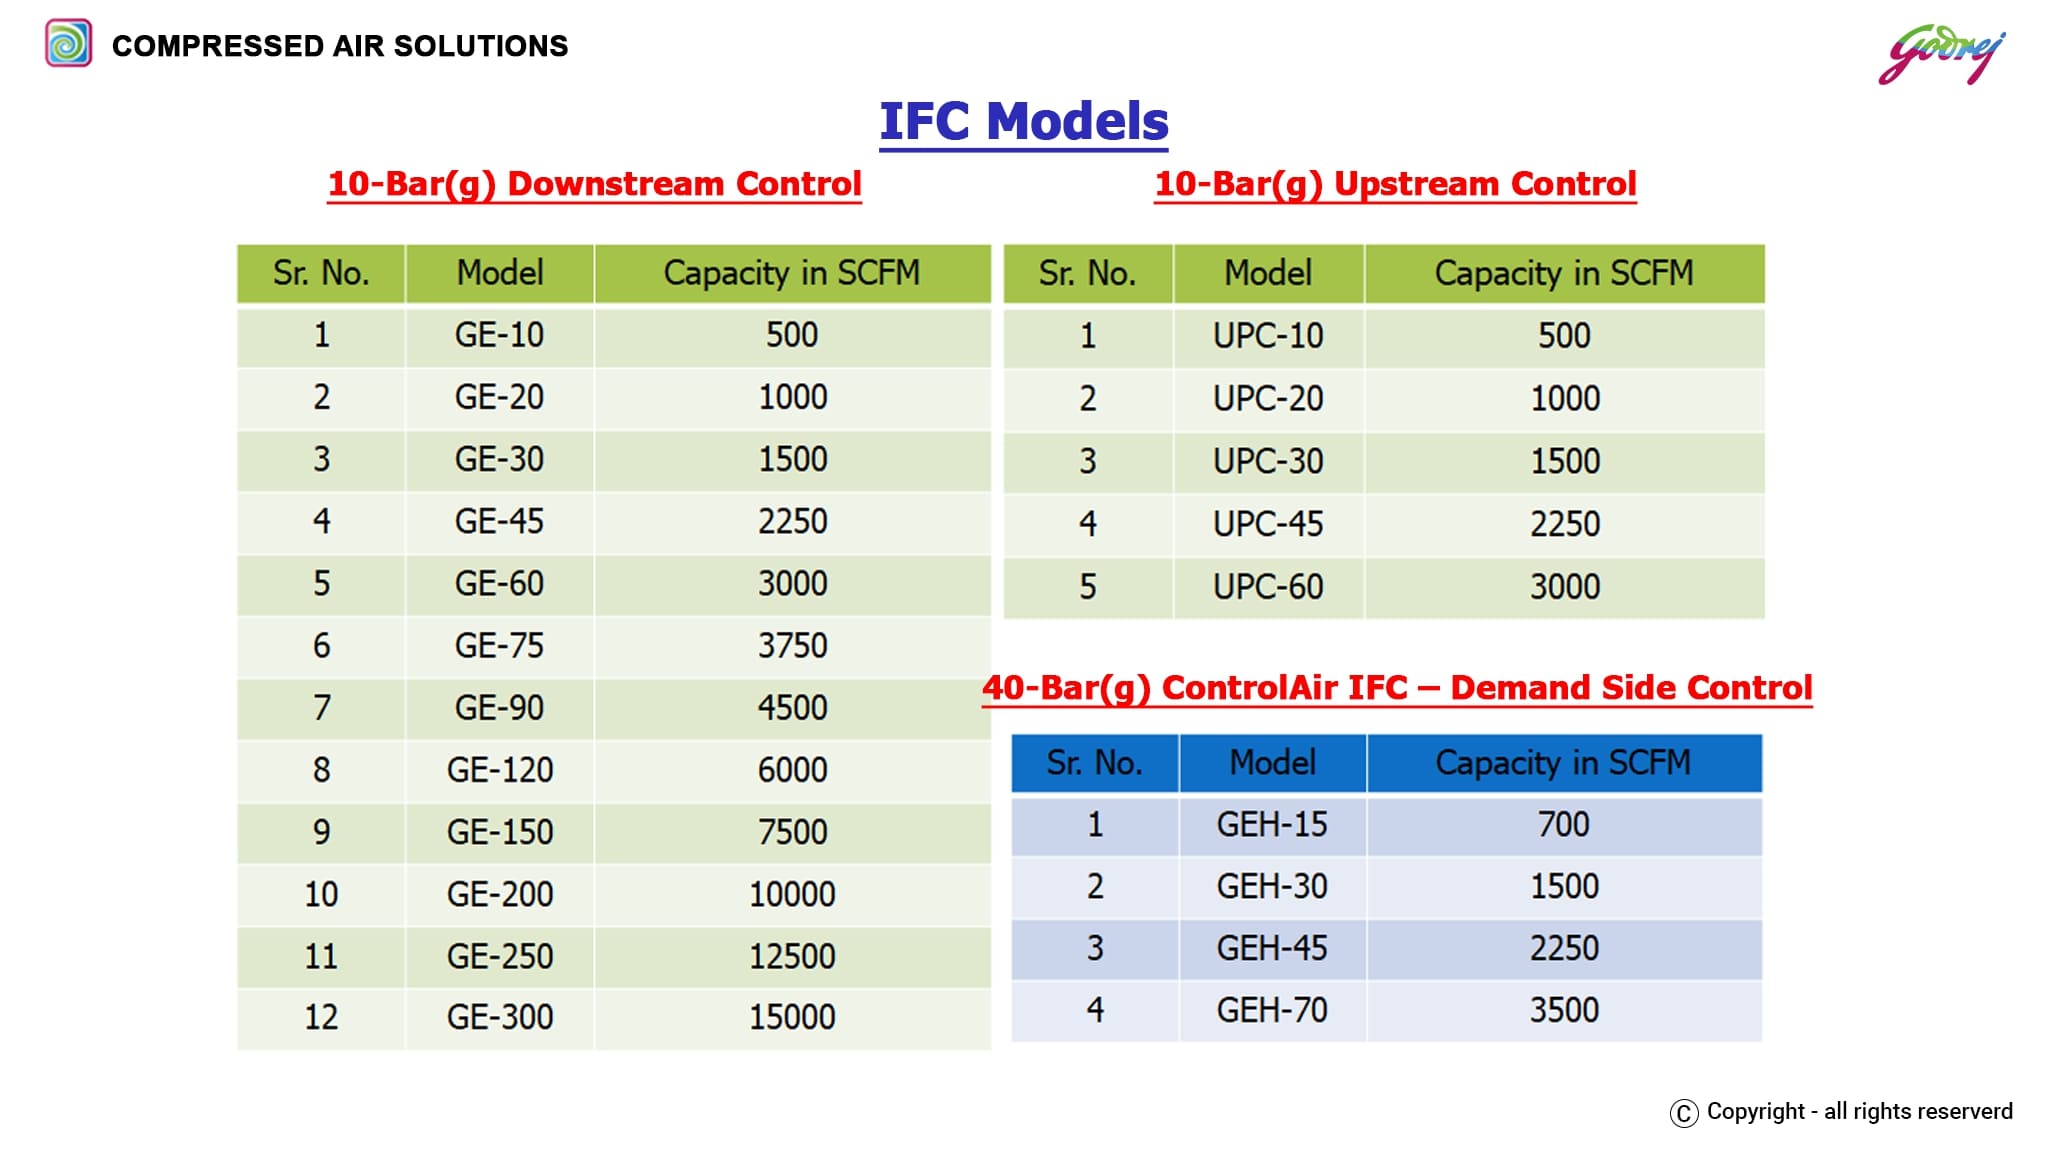 IFC Downstream & Upstream Control-ENERGY SAVING SOLUTIONS IN COMPRESSED AIR NETWORK (GODREJ)